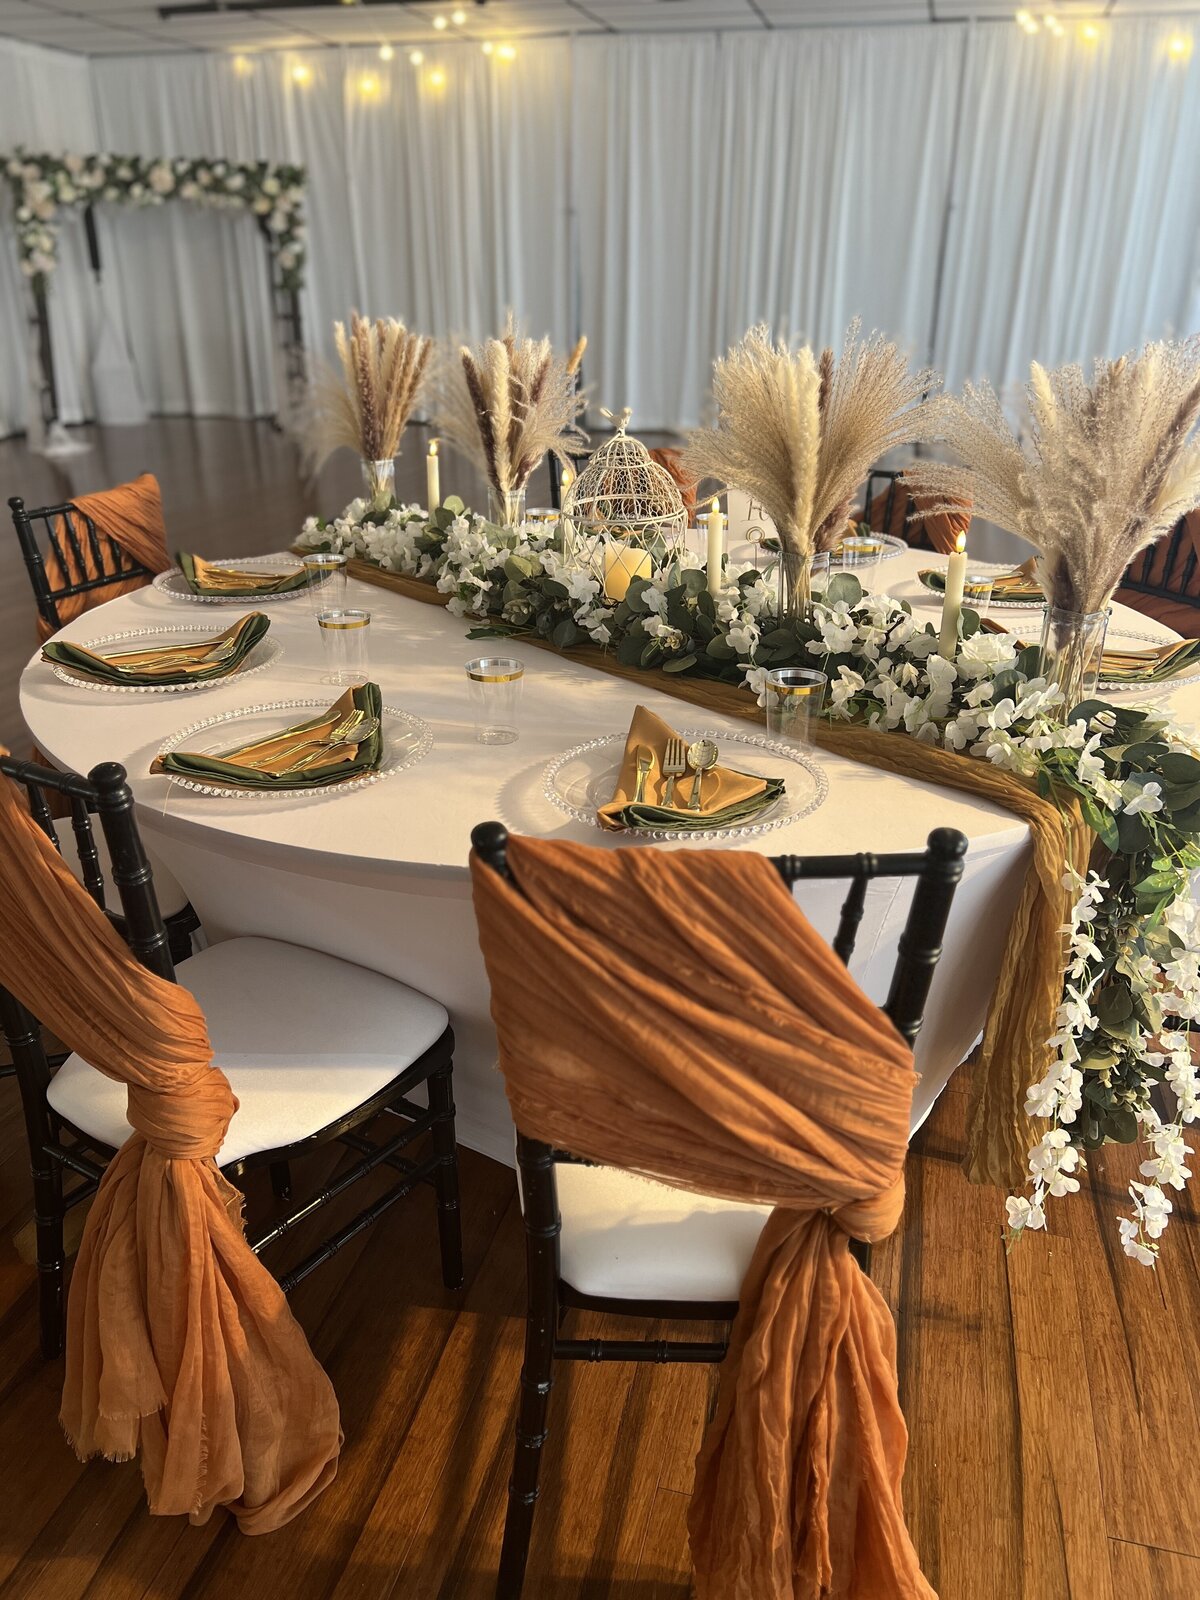 Natural and elegant boho-inspired inclusive decor in a Clearwater event hall - Creating a captivating and stylish ambiance for unforgettable occasions